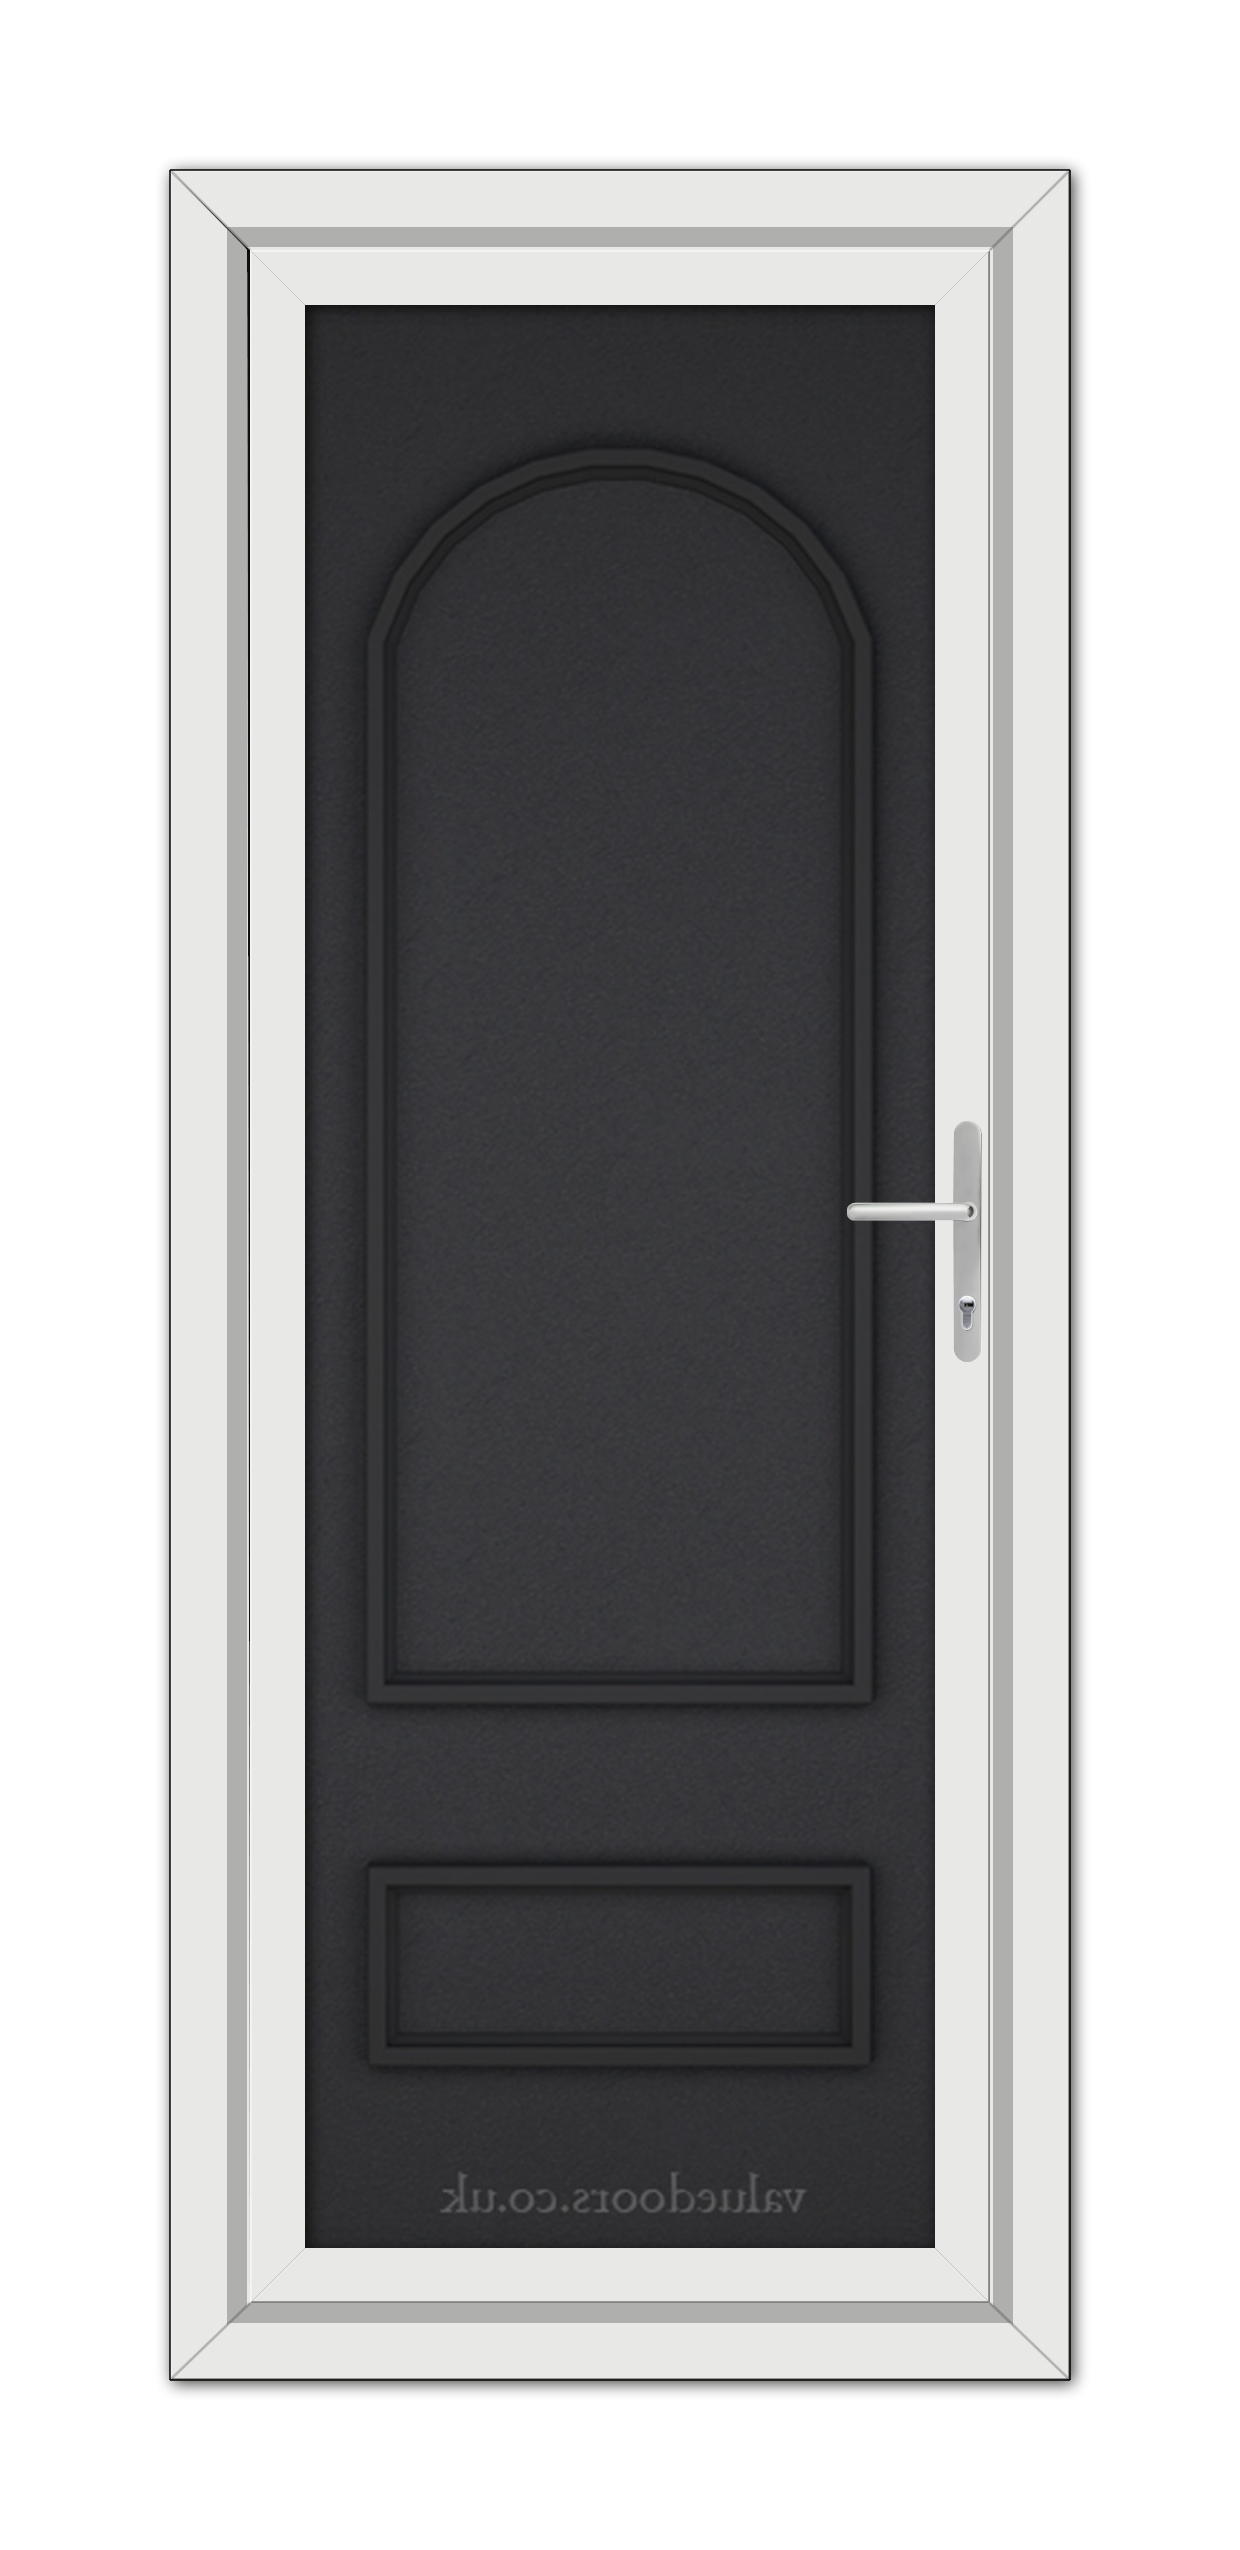 A vertical image of a modern Black Brown Canterbury Solid uPVC Door with a silver handle, framed by a white doorframe.